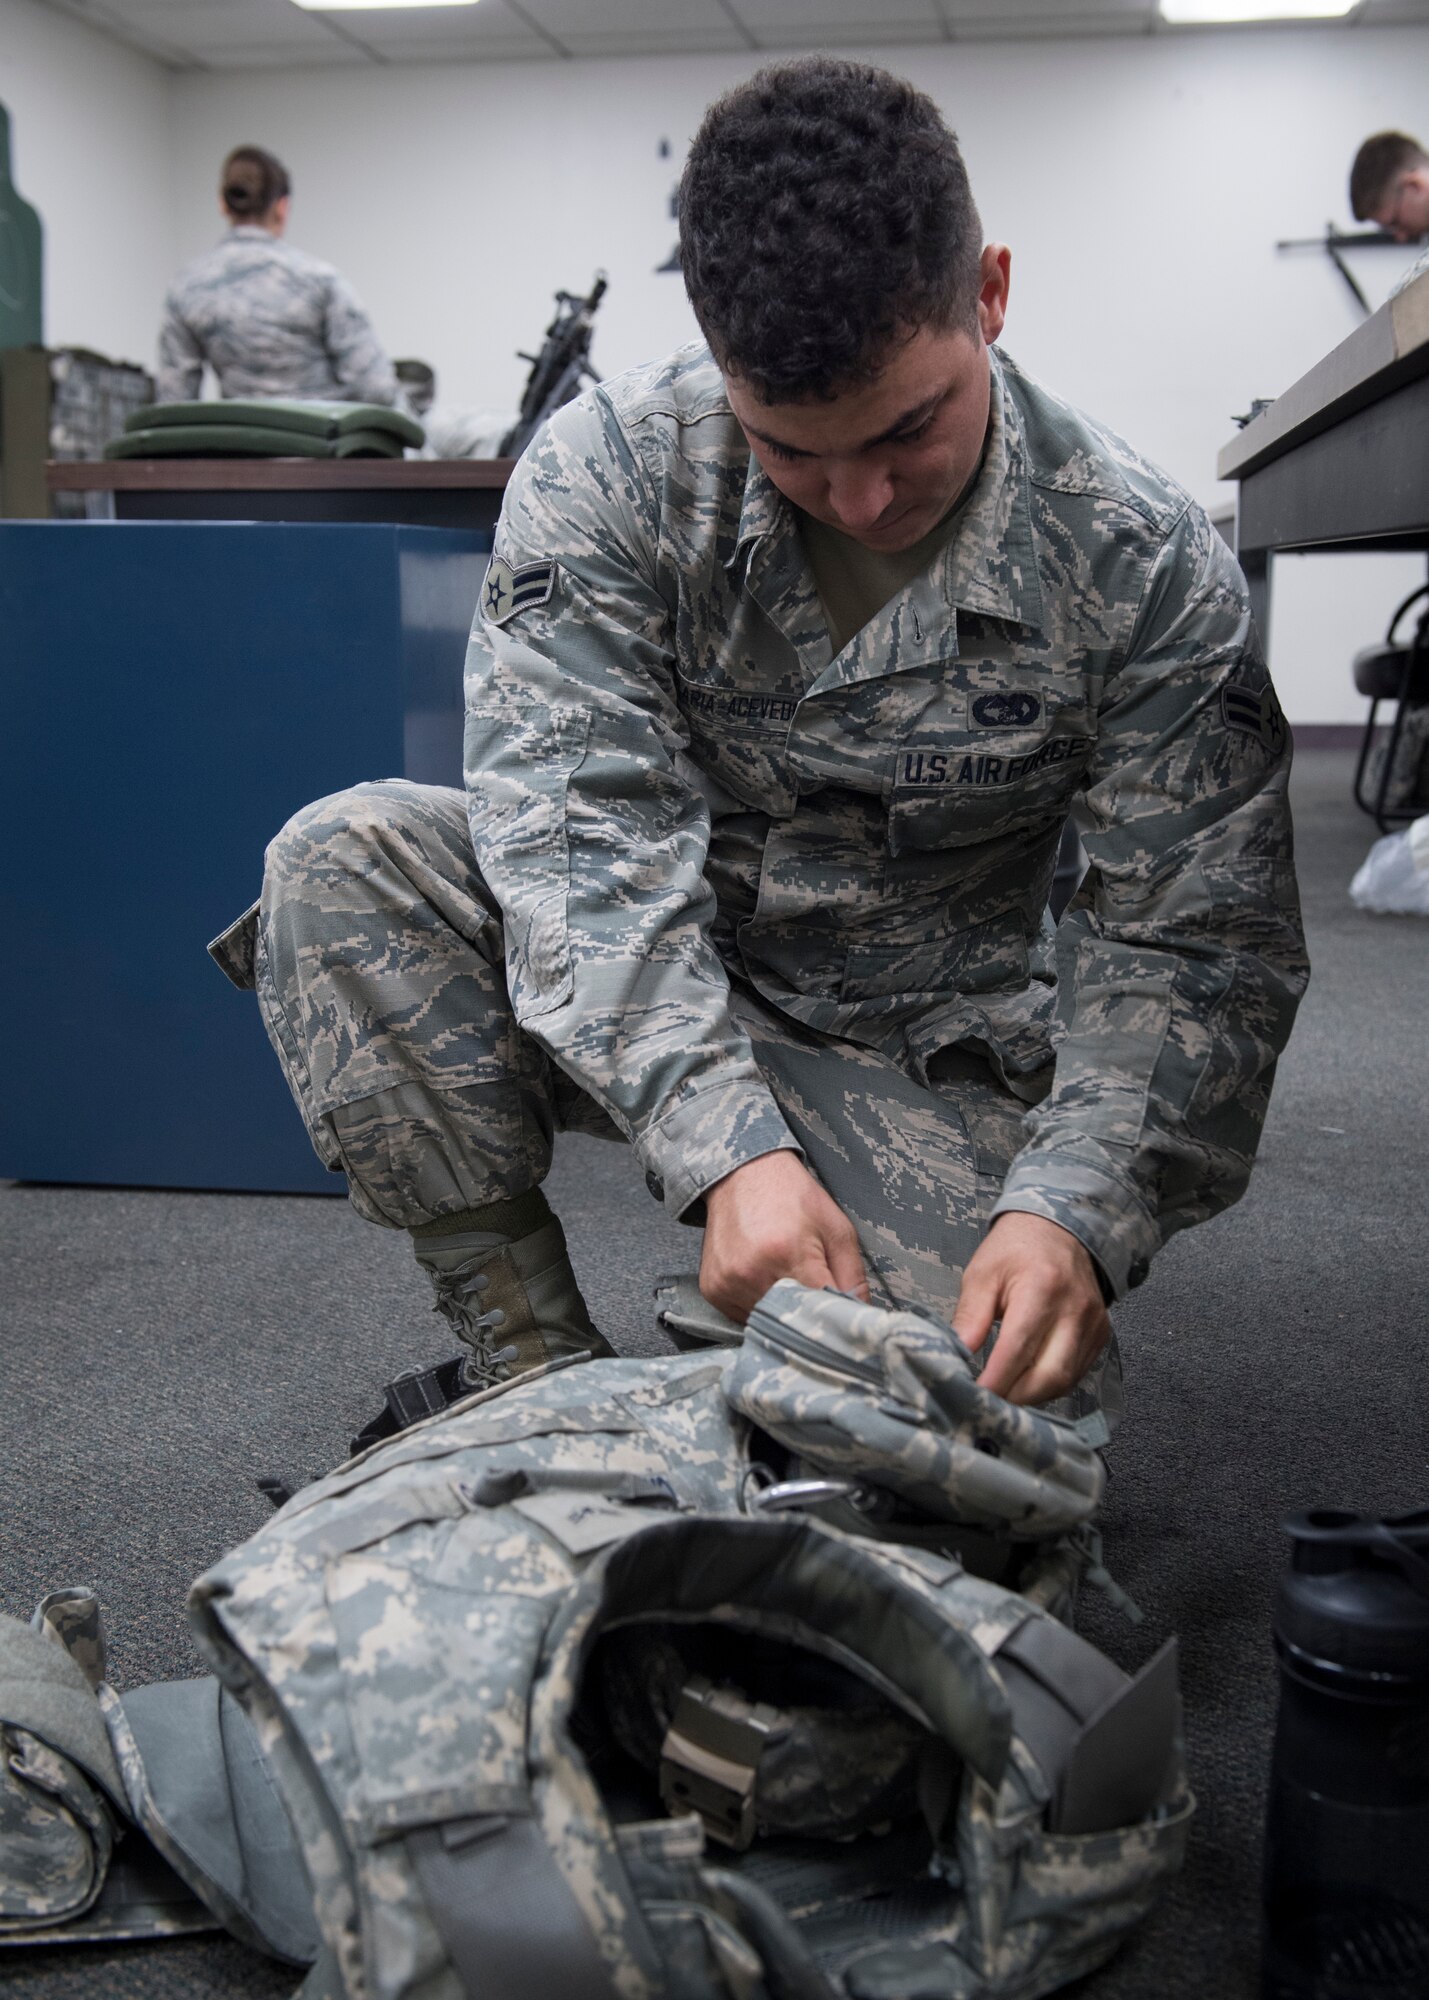 374th SFS hosts Weapons Handling Skills and Tactics Course